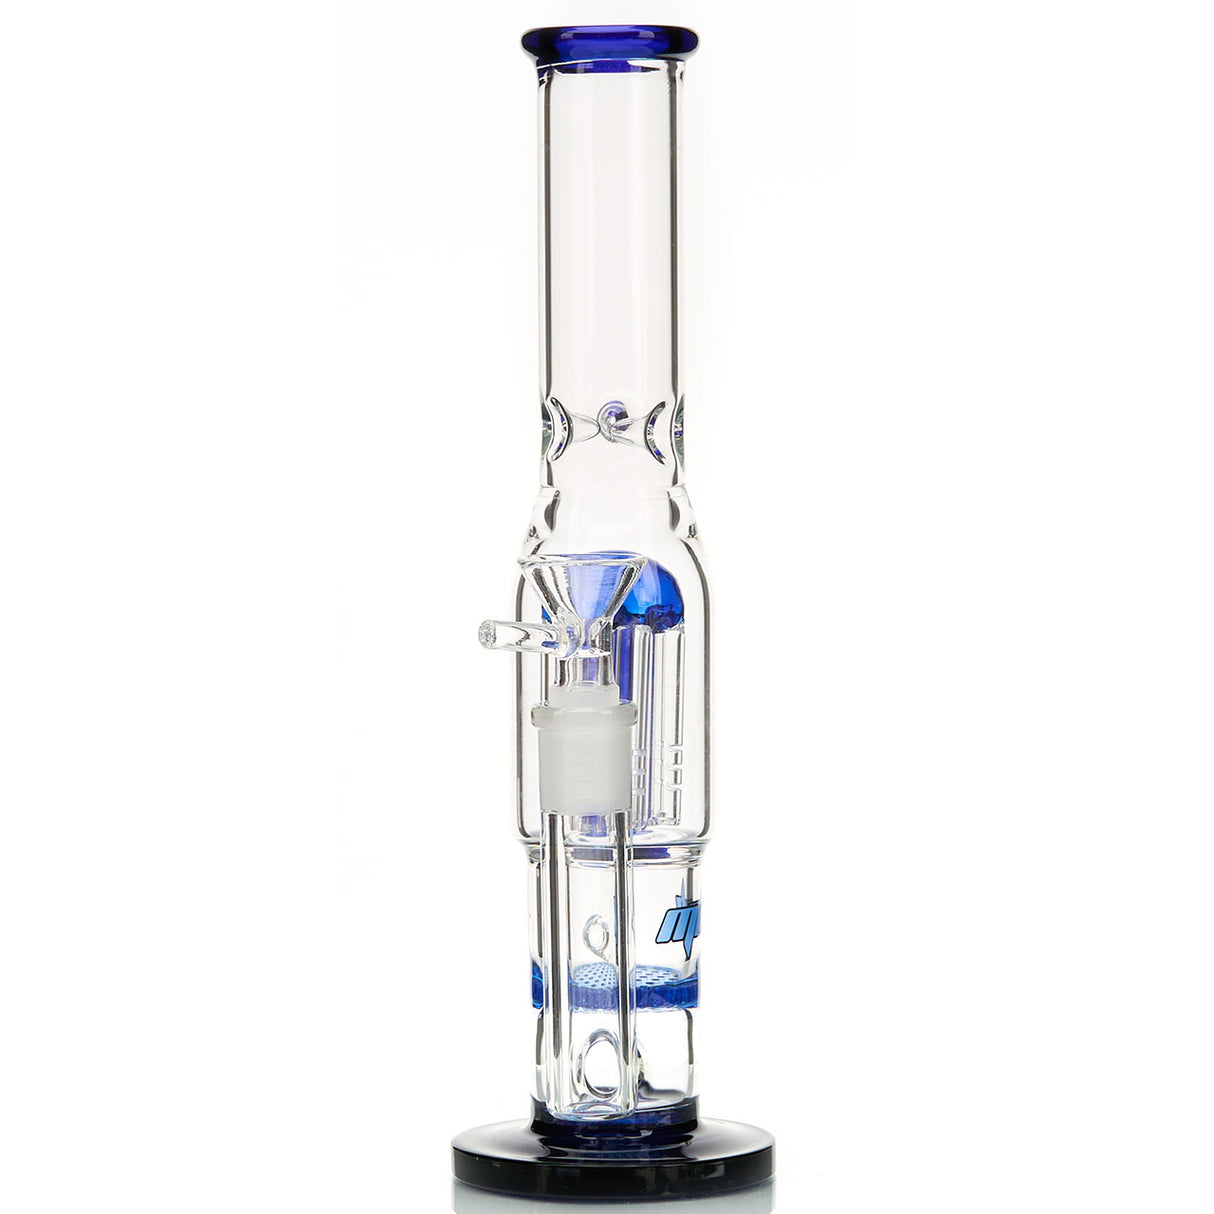 10 Percolator Bong Water Pipe - 3 Piece Set with Water Pipe Bowl and Down  Stem -SmokeDay